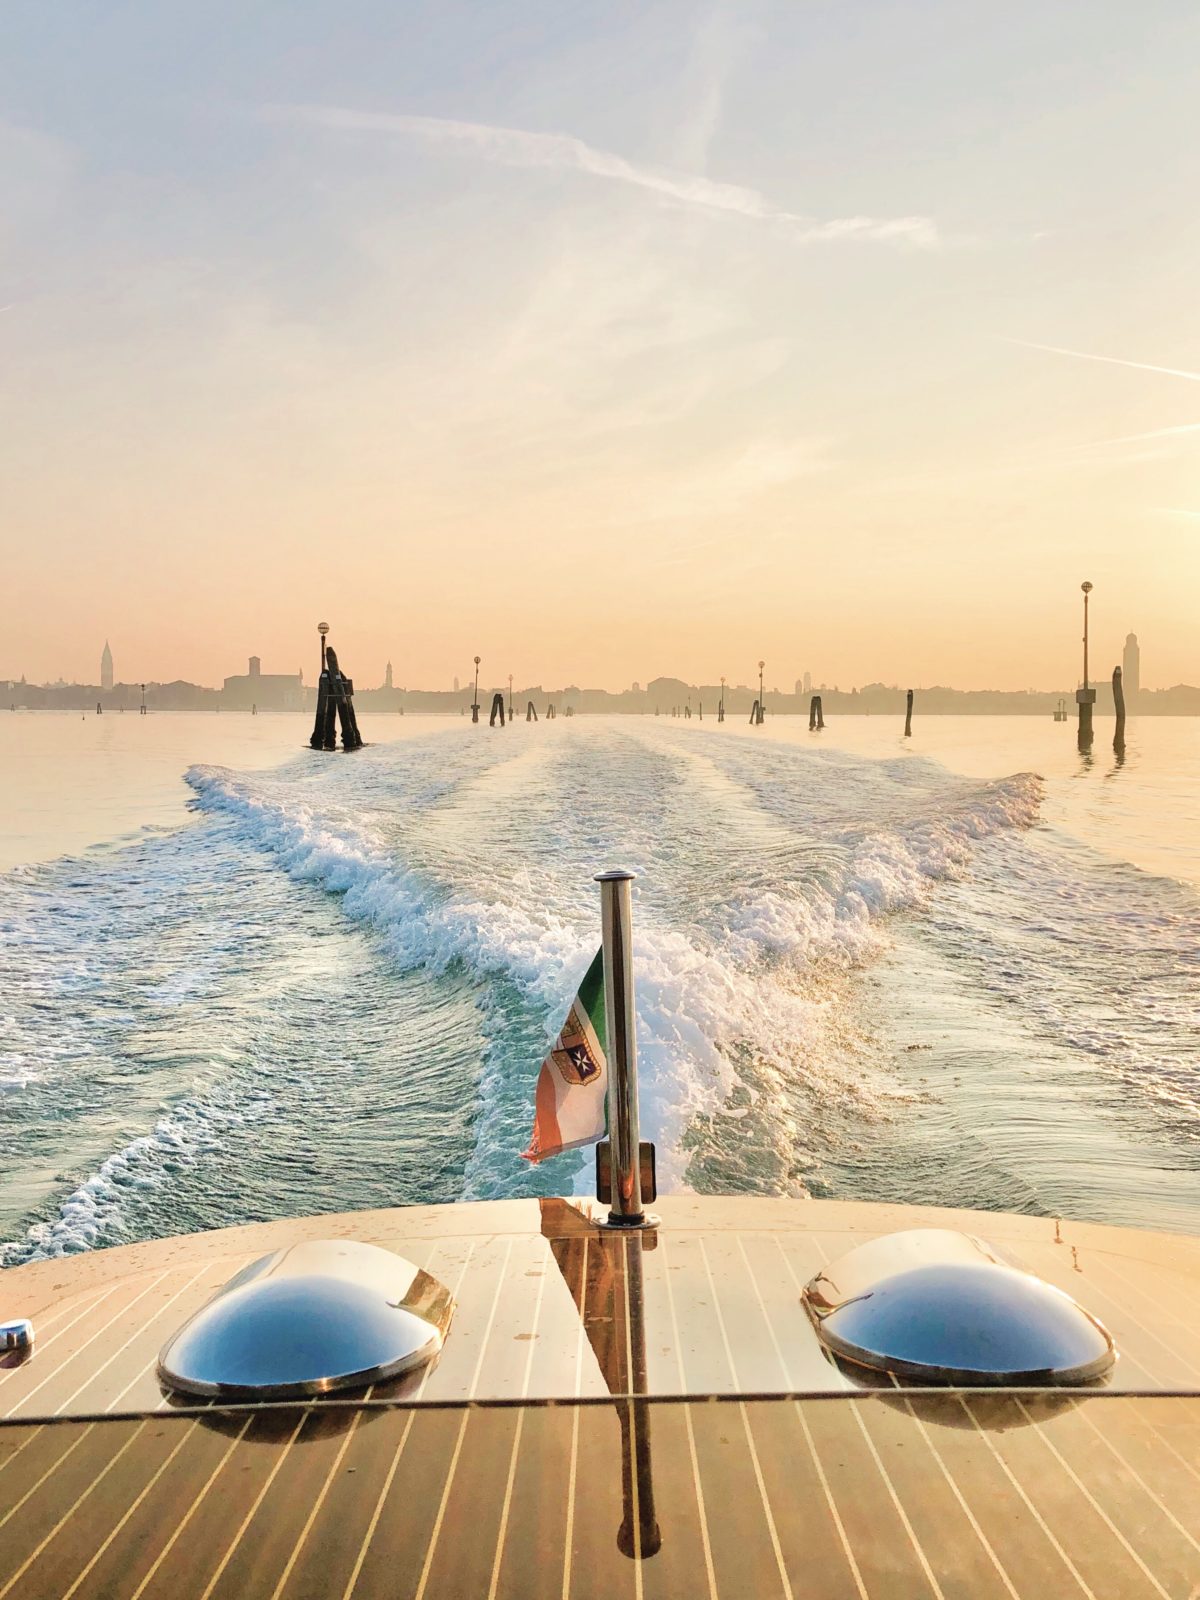 Venice Wedding Photographer | Italy Film Photography | Molly Carr Photography | Venice Sunset Water Taxi